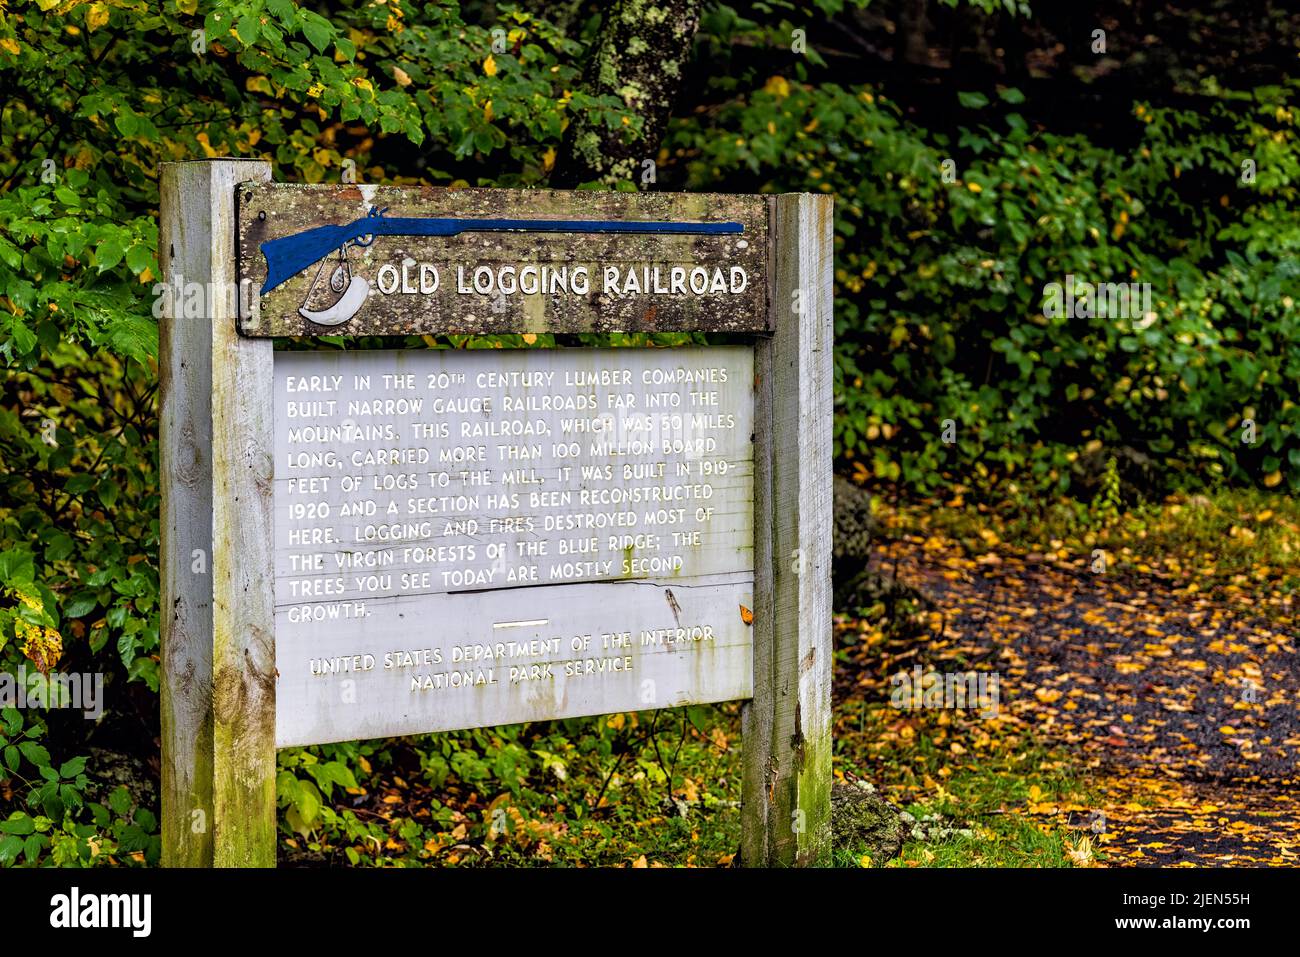 Raphine, USA - October 7, 2021: Blue Ridge Mountains with sign on parkway overlook for Old Logging Railroad history information in autumn fall season Stock Photo